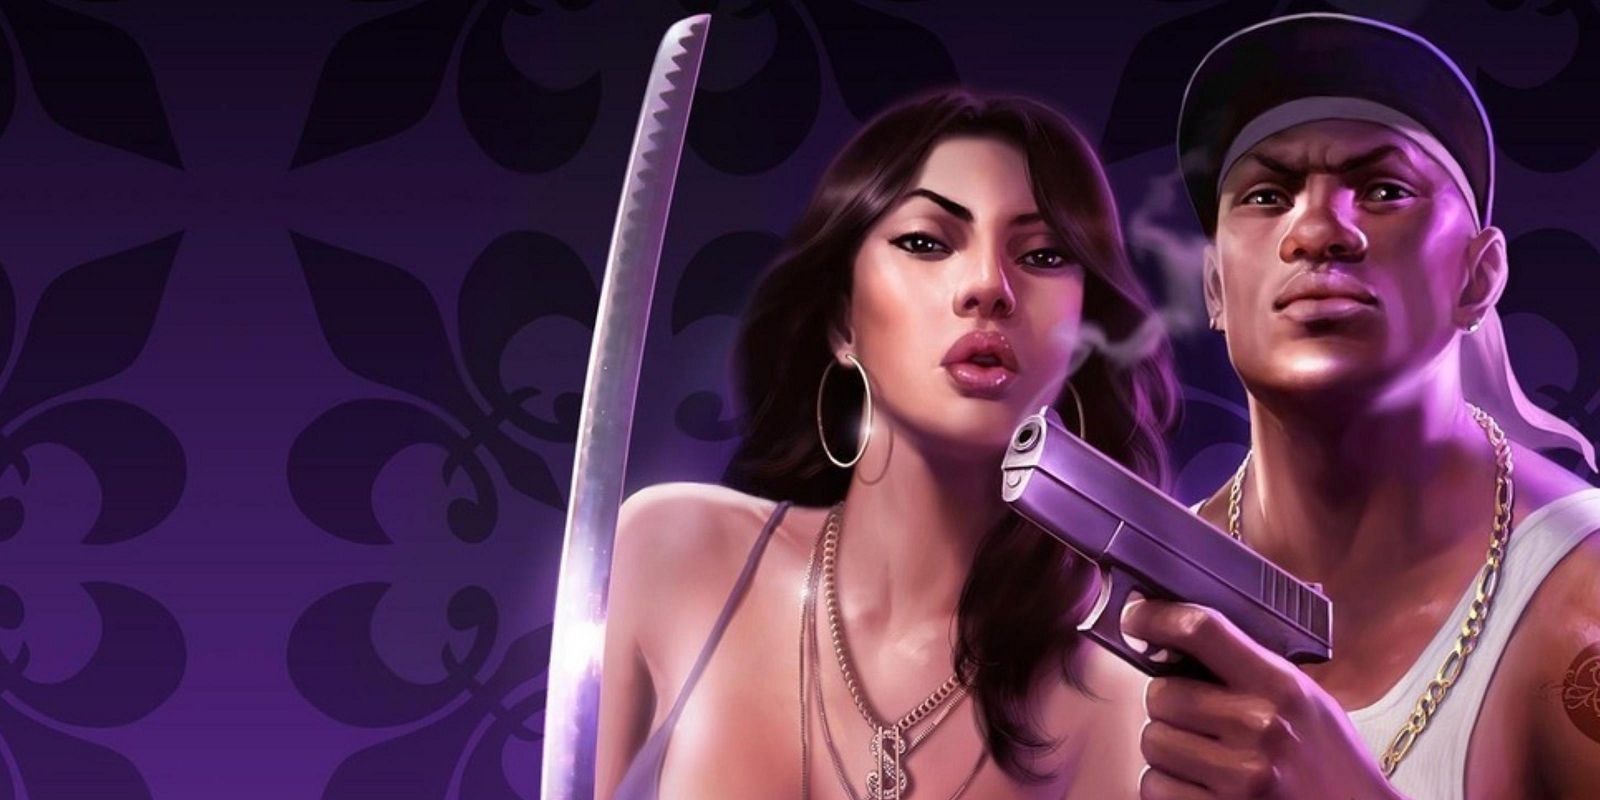 Saints Row IV: Re-elected – Recensione